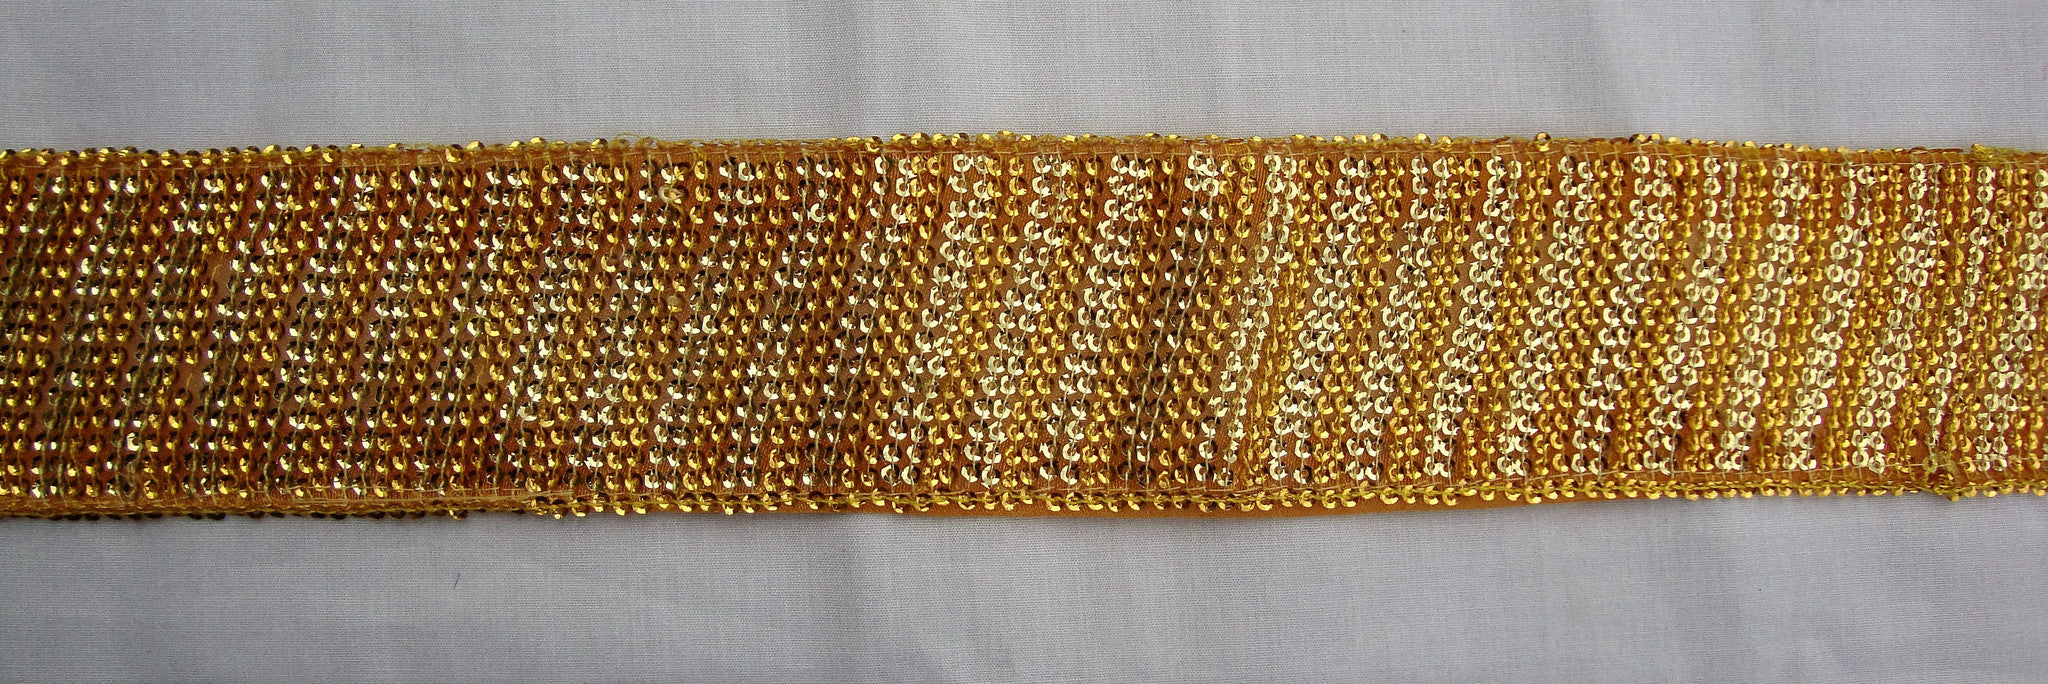 Yellow Gold Trimming with sequins (Sold as a 3 yard piece)